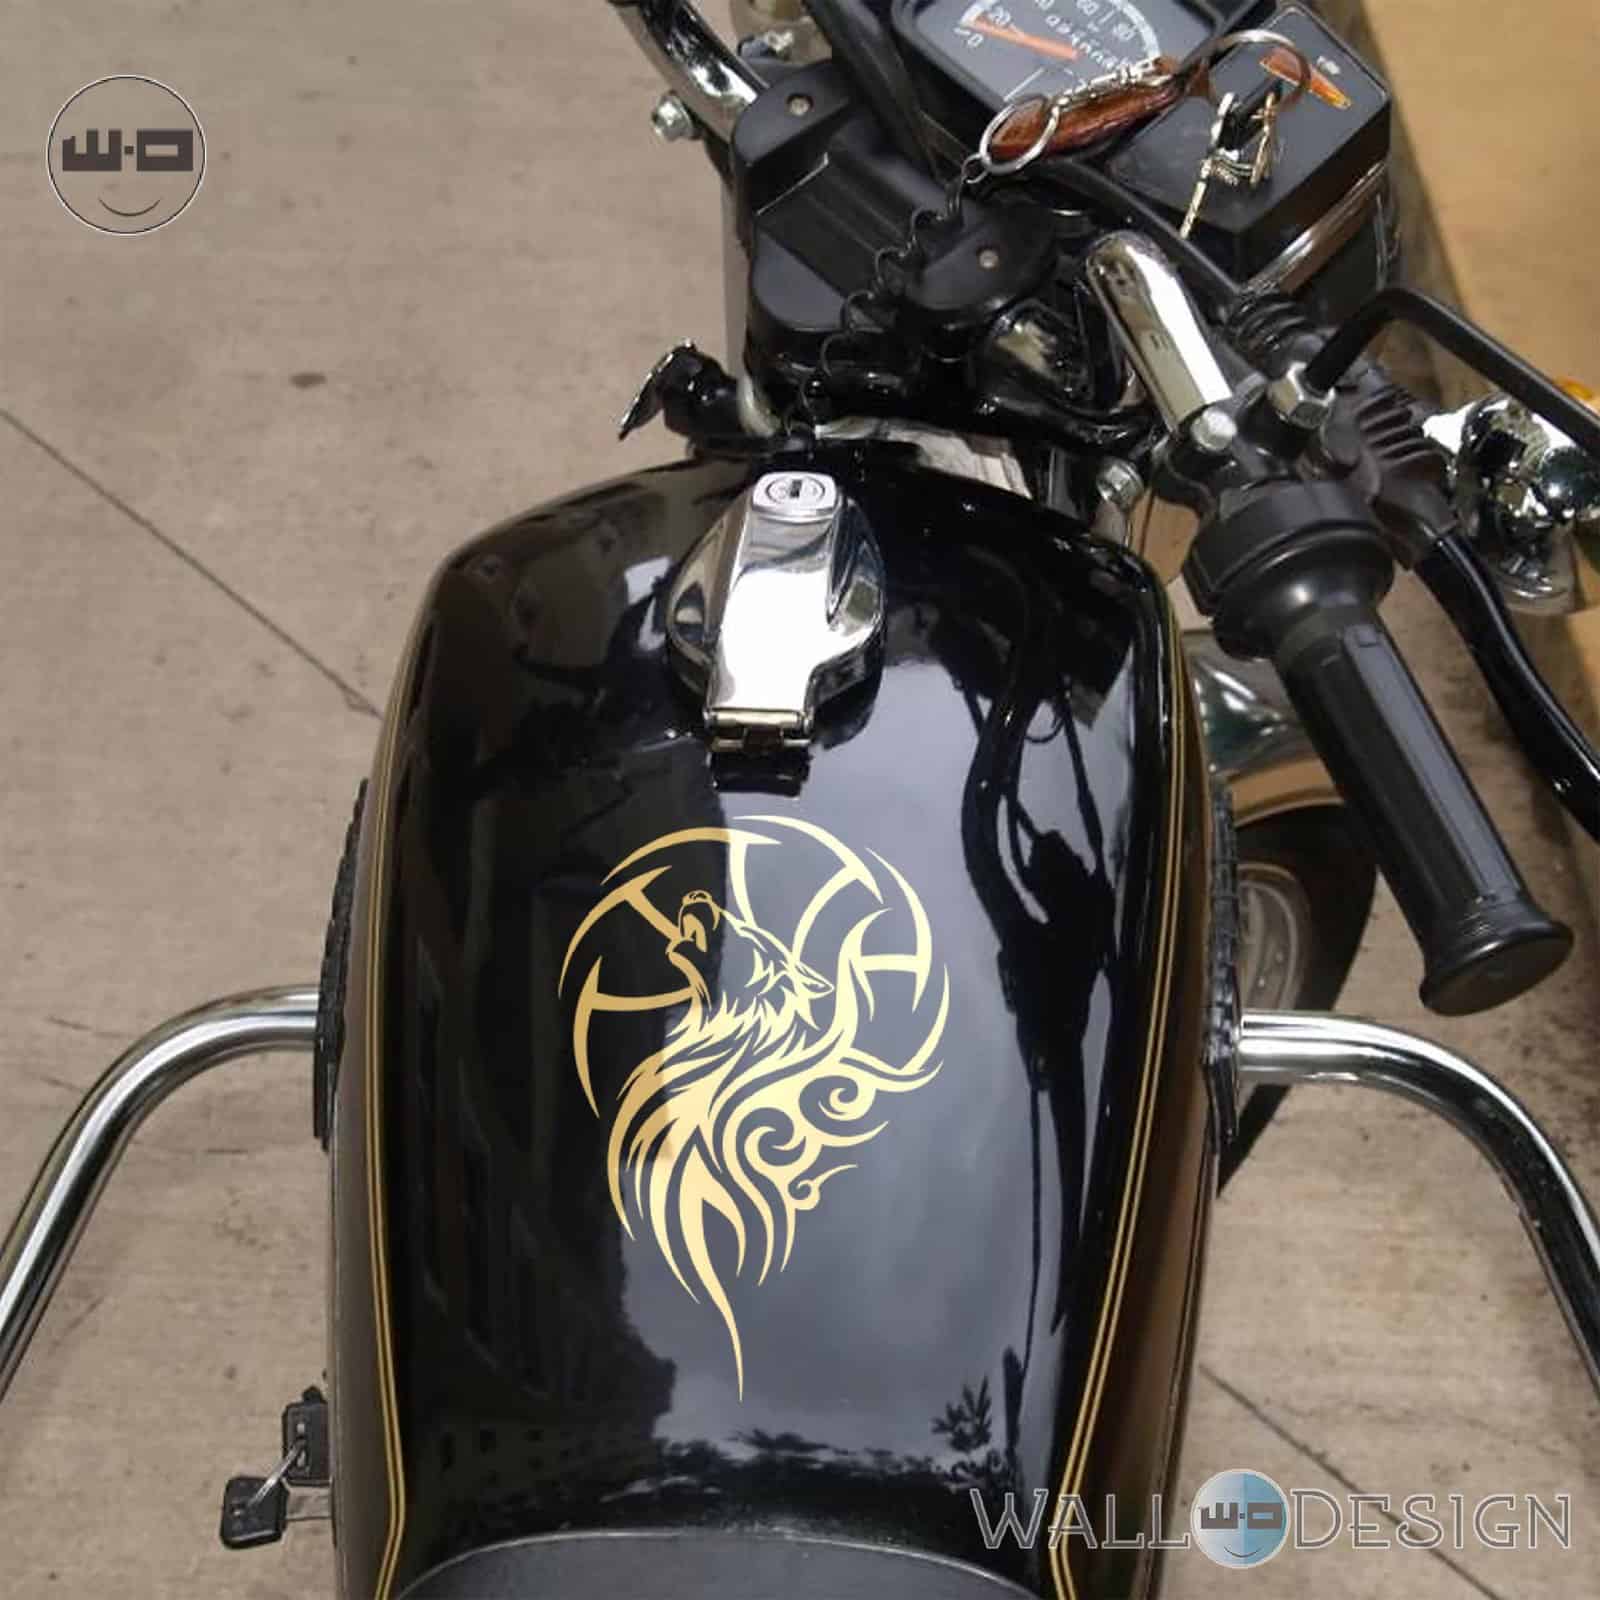 Motorcycle Stock Illustrations  111136 Motorcycle Stock Illustrations  Vectors  Clipart  Dreamstime